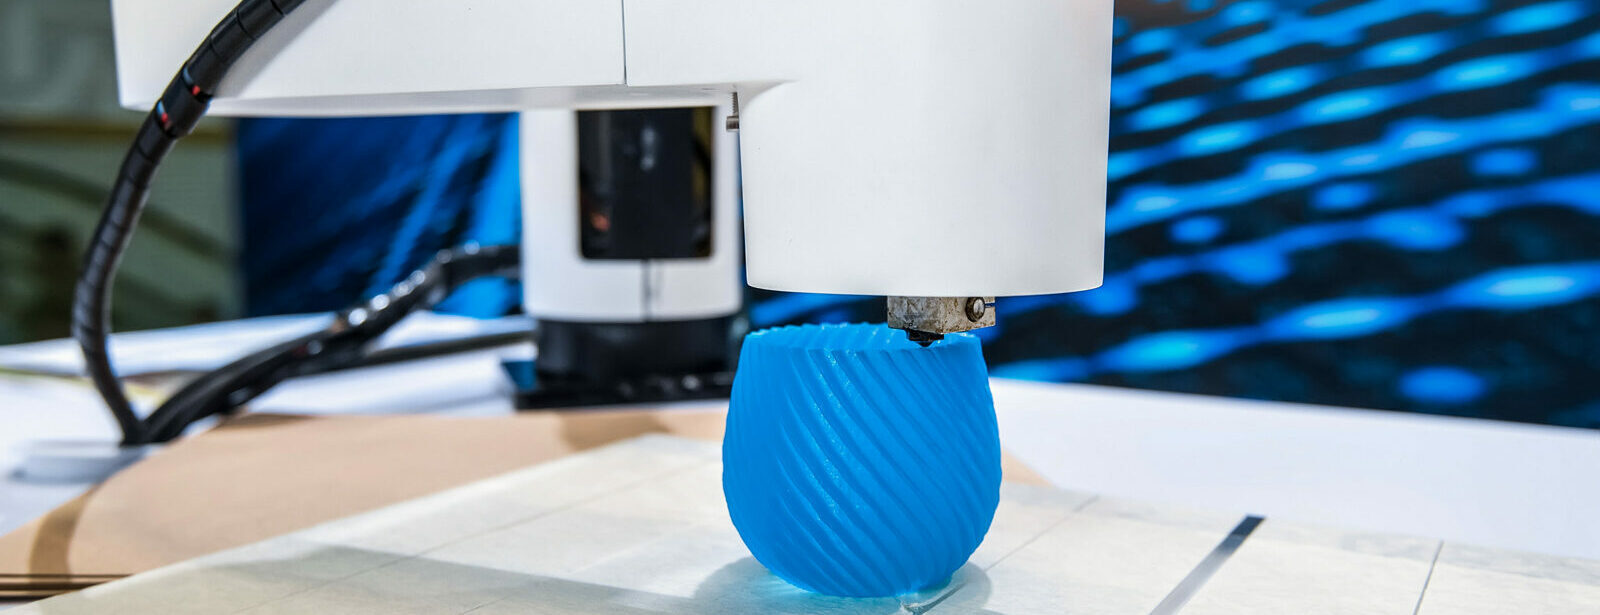 Comprehensive solutions in 3D printing